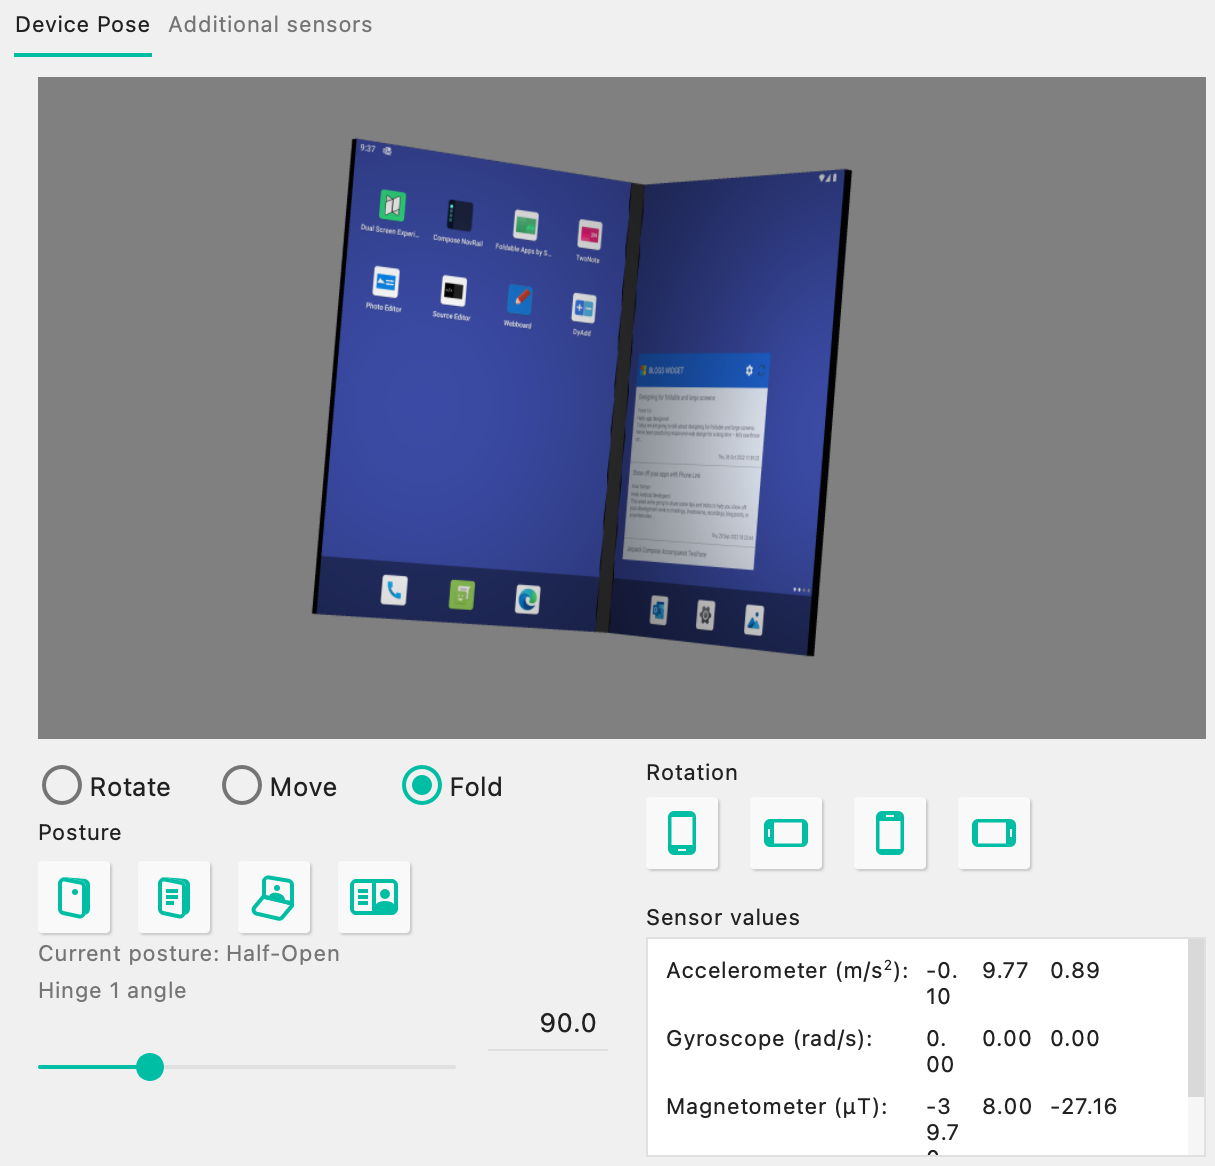 android emulator for windows 10 with multiple screens